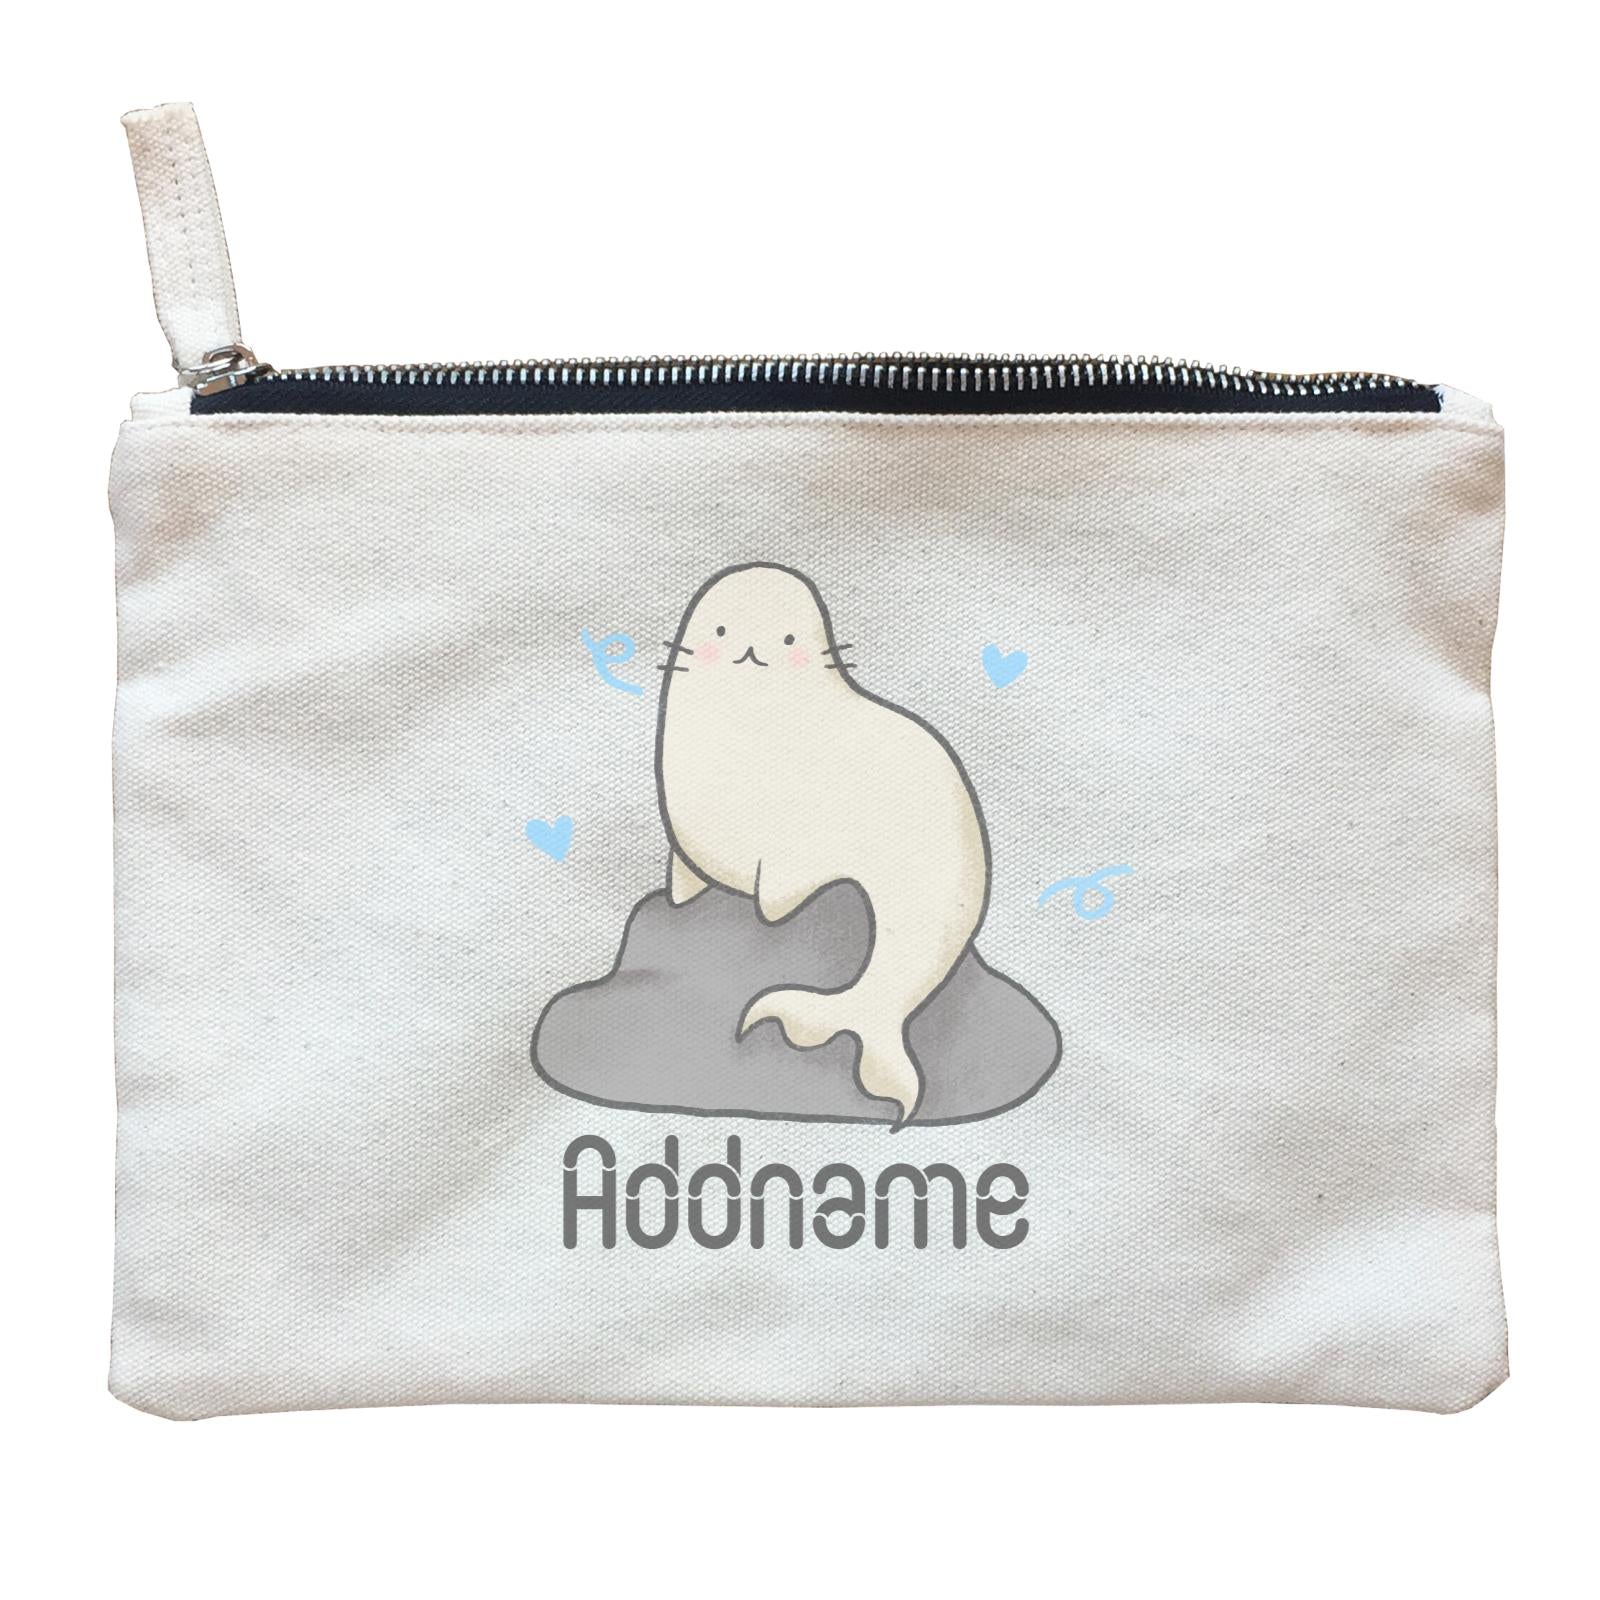 Cute Hand Drawn Style Seal Addname Zipper Pouch